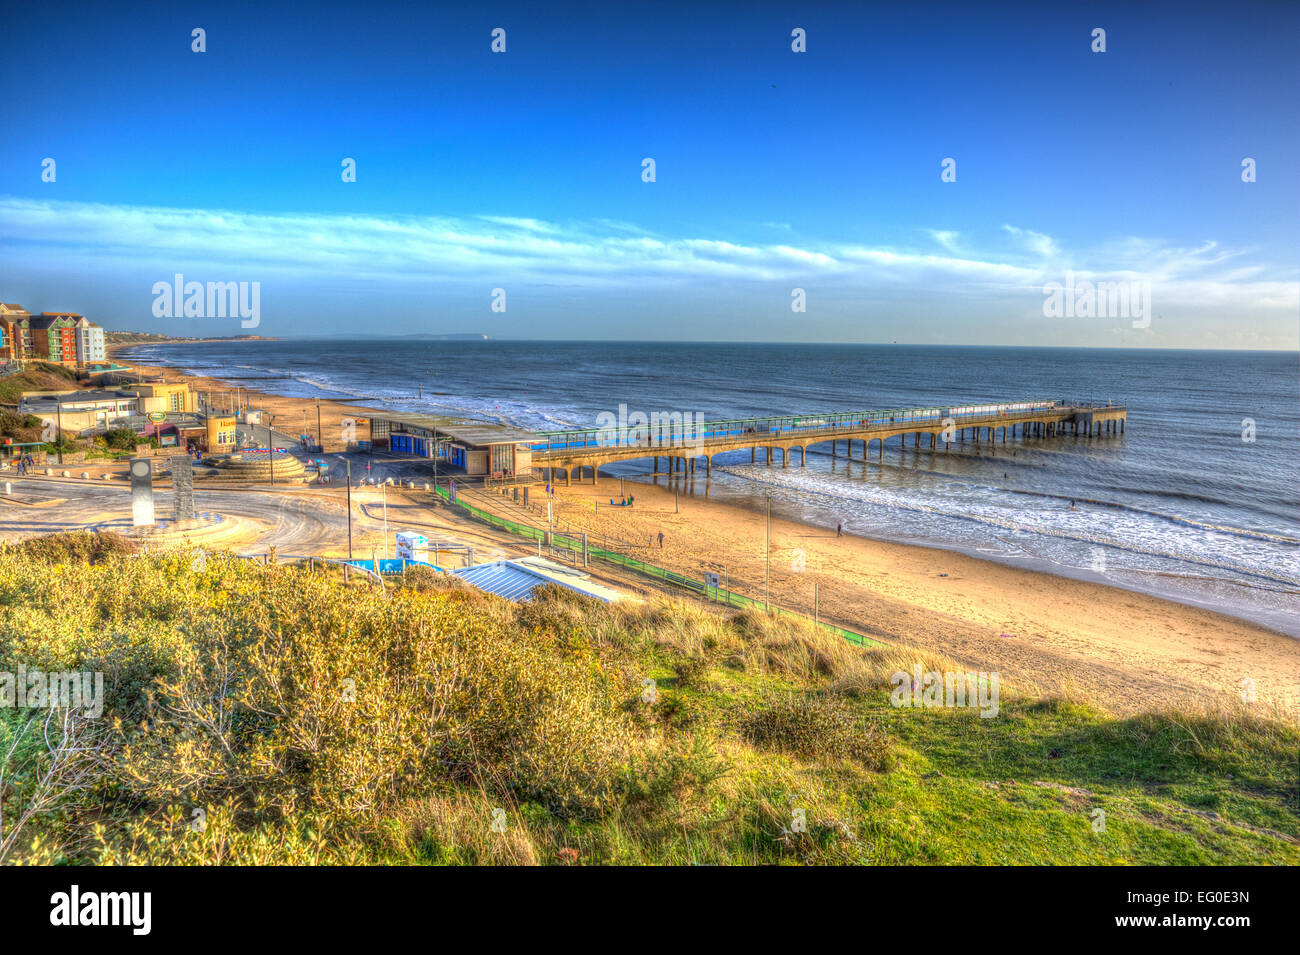 Boscombe Pier Bournemouth coast Dorset England UK near to Poole known for beautiful sandy beaches in artistic HDR Stock Photo